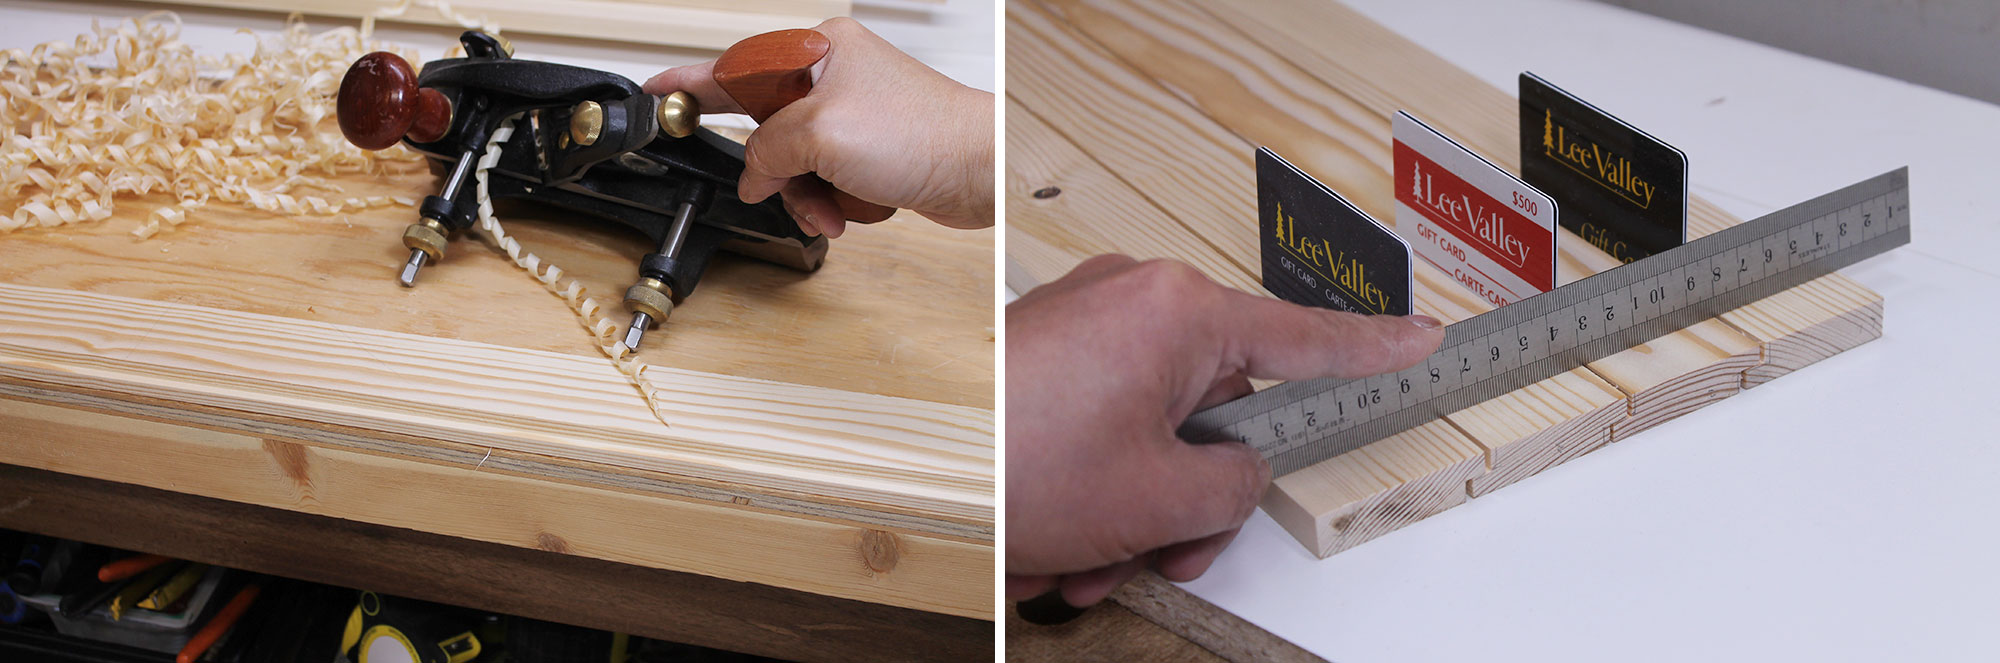 Image left: Rabbet plane on boards. Image right: Using ruler to demonstrate  precision of hand-cut rabbets.